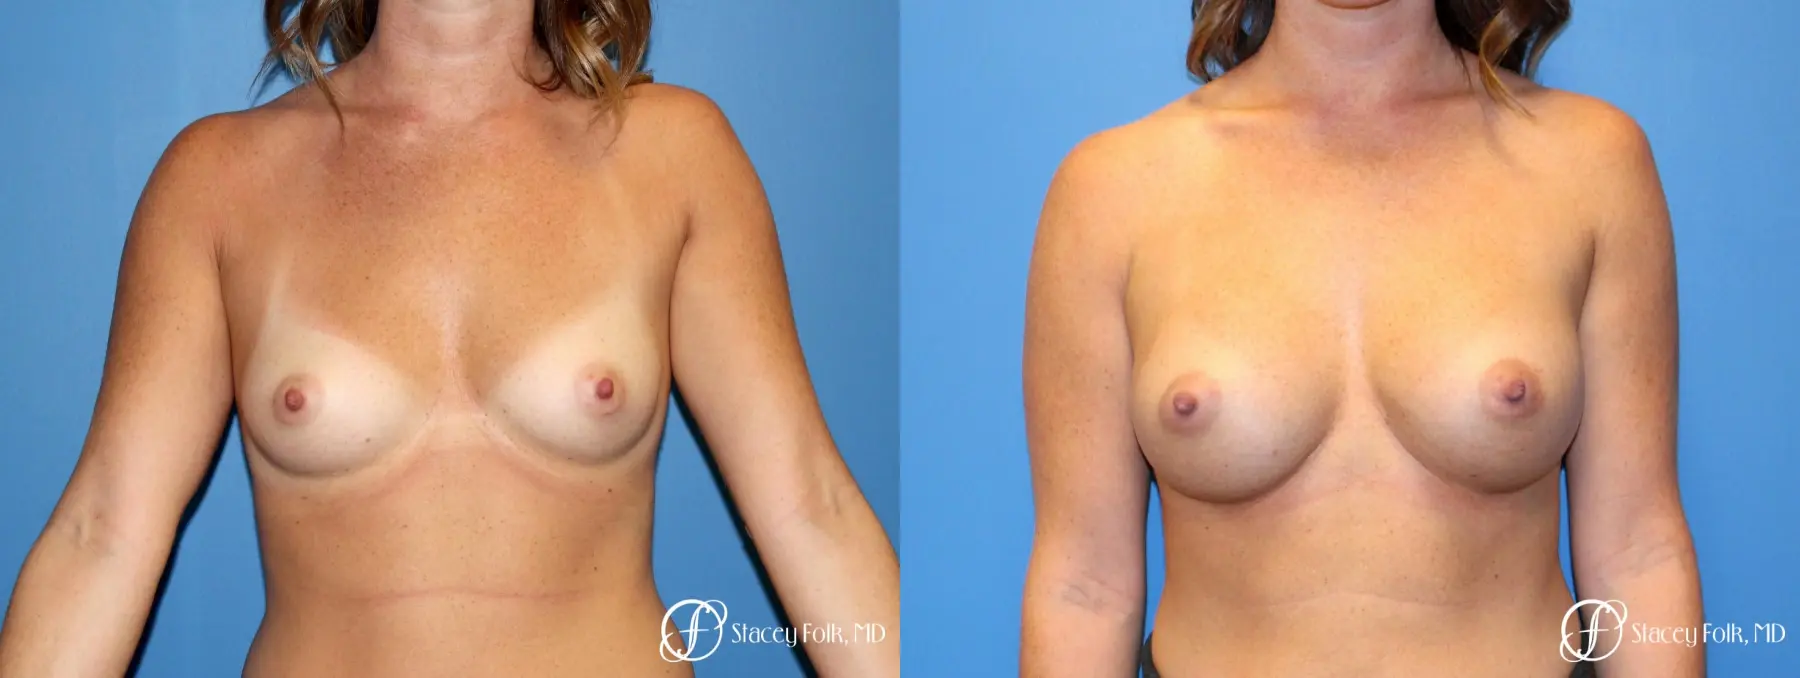 Denver Breast Augmentation using Sientra Silicone Breast Implants 9092 - Before and After